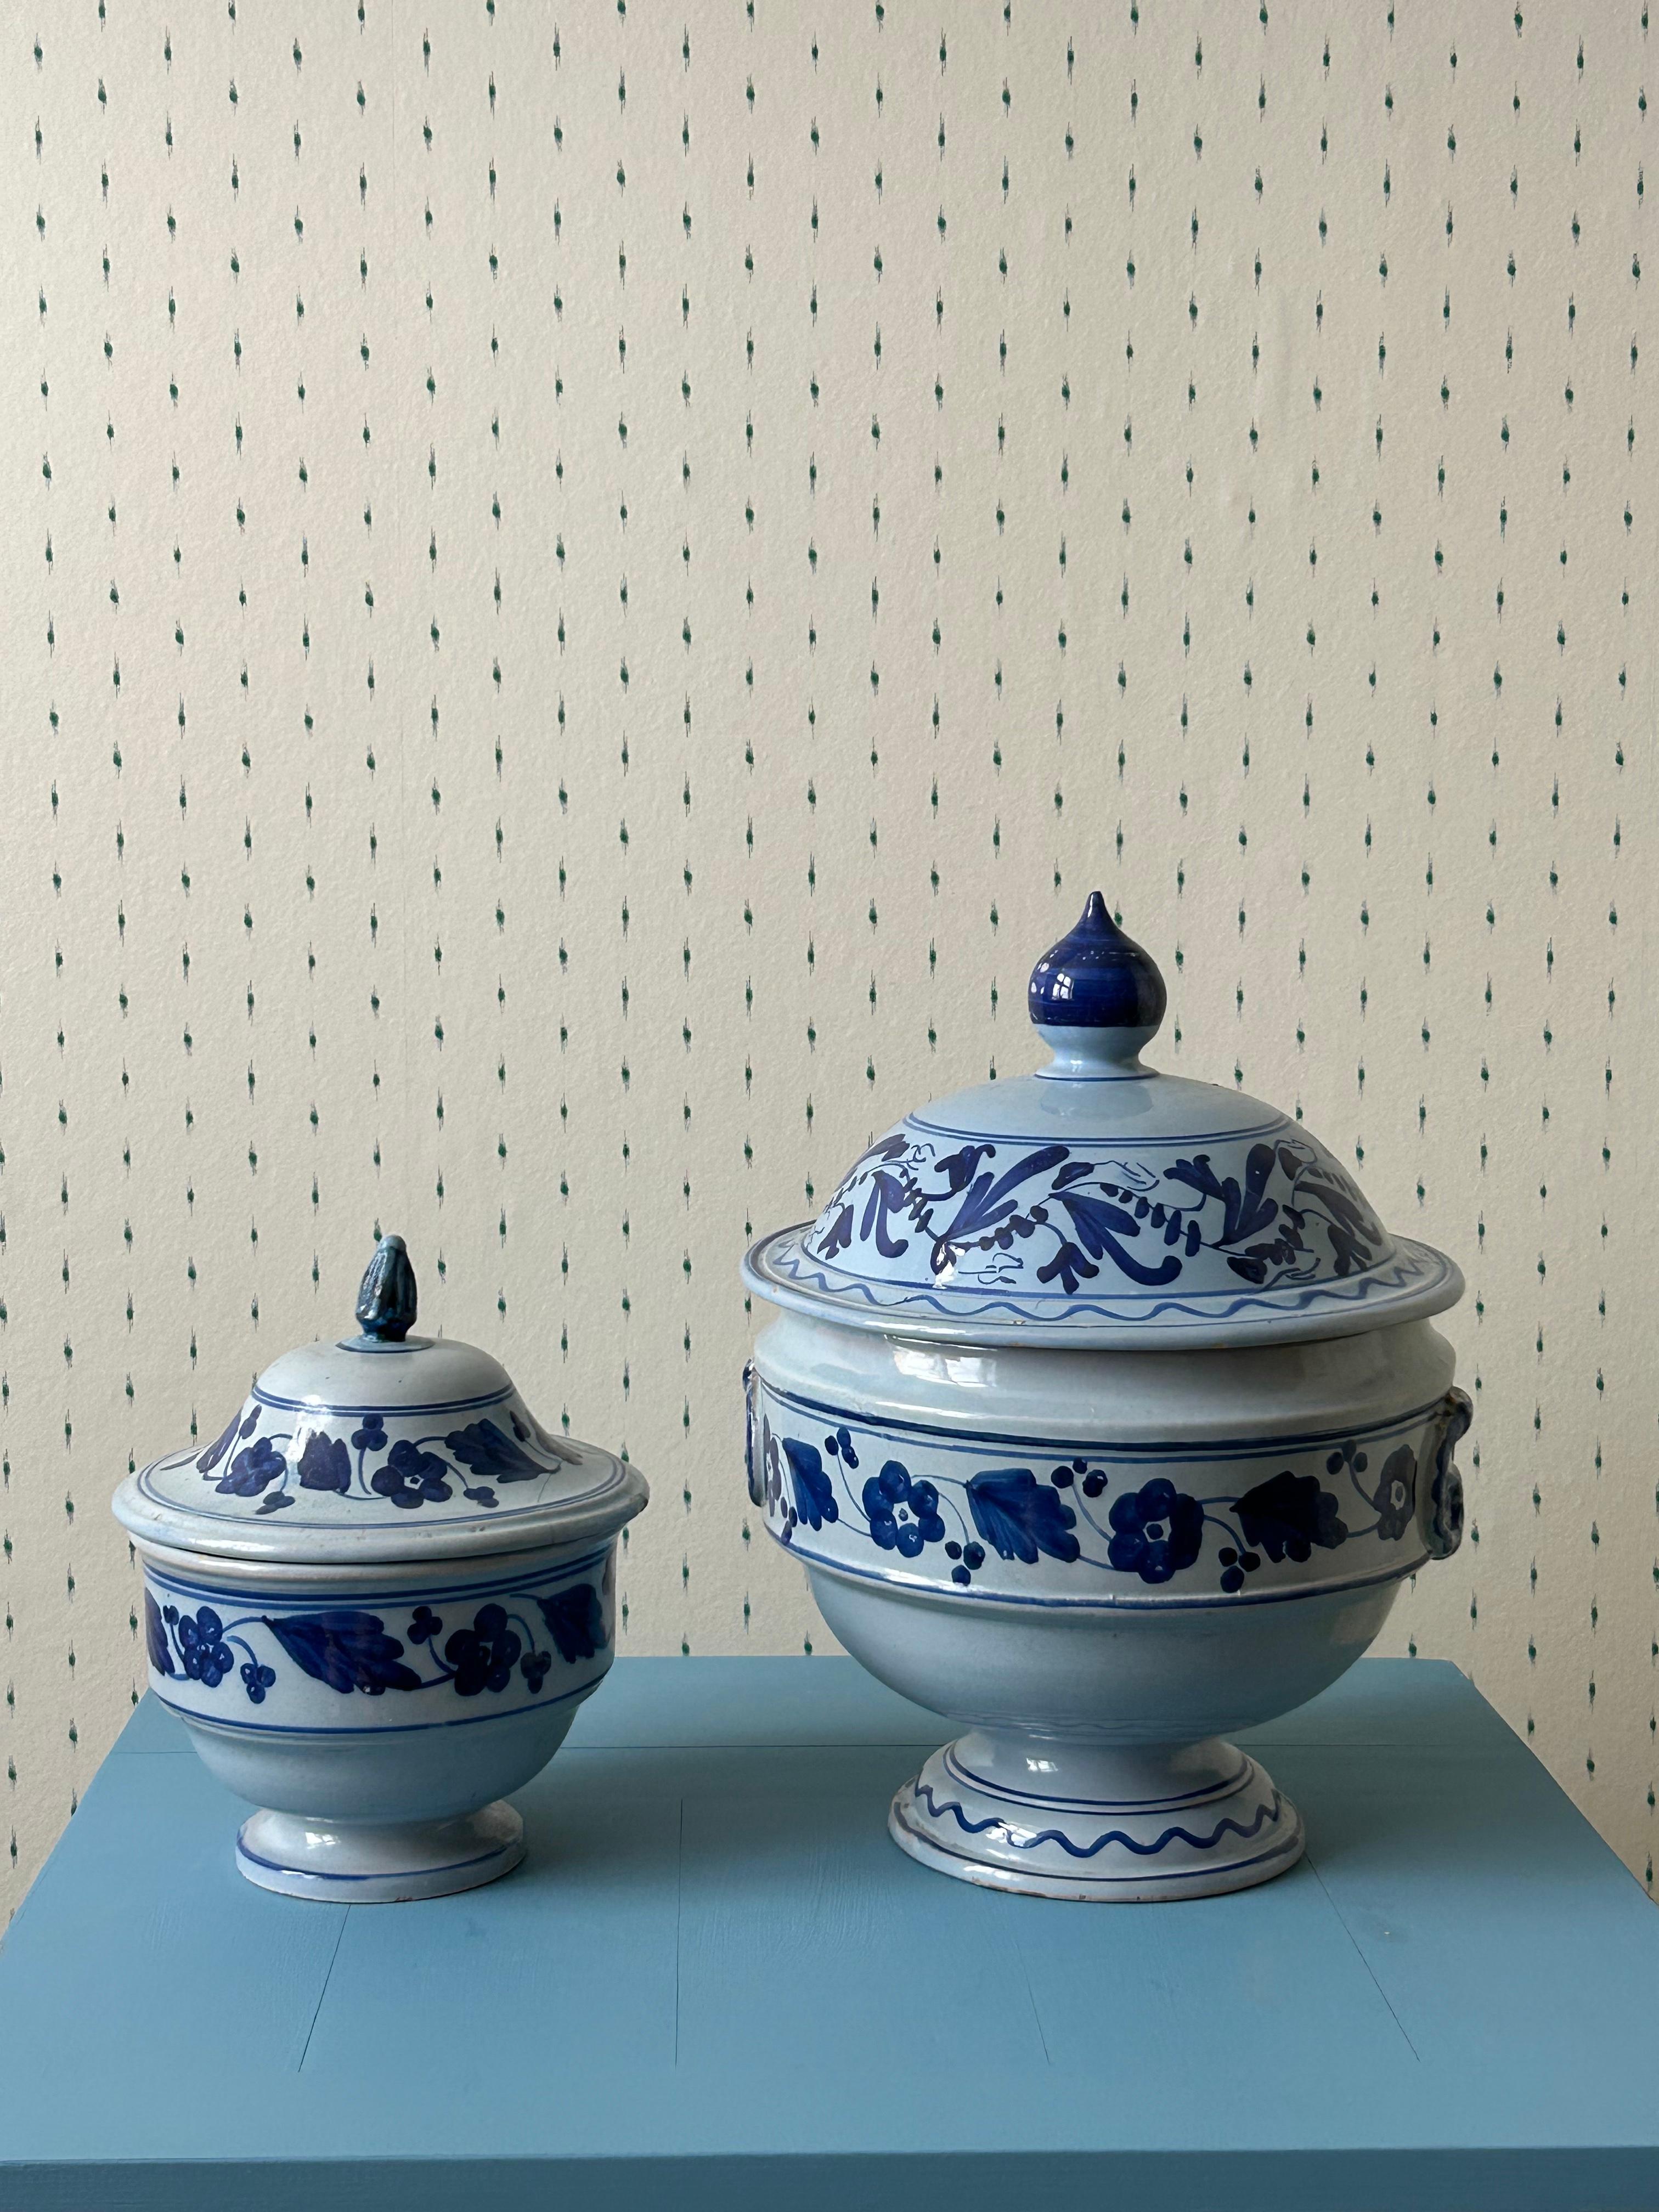 Italian Vintage Ceramic Tureens with Blue Flower Decorations, Italy, Late 19th-Century For Sale